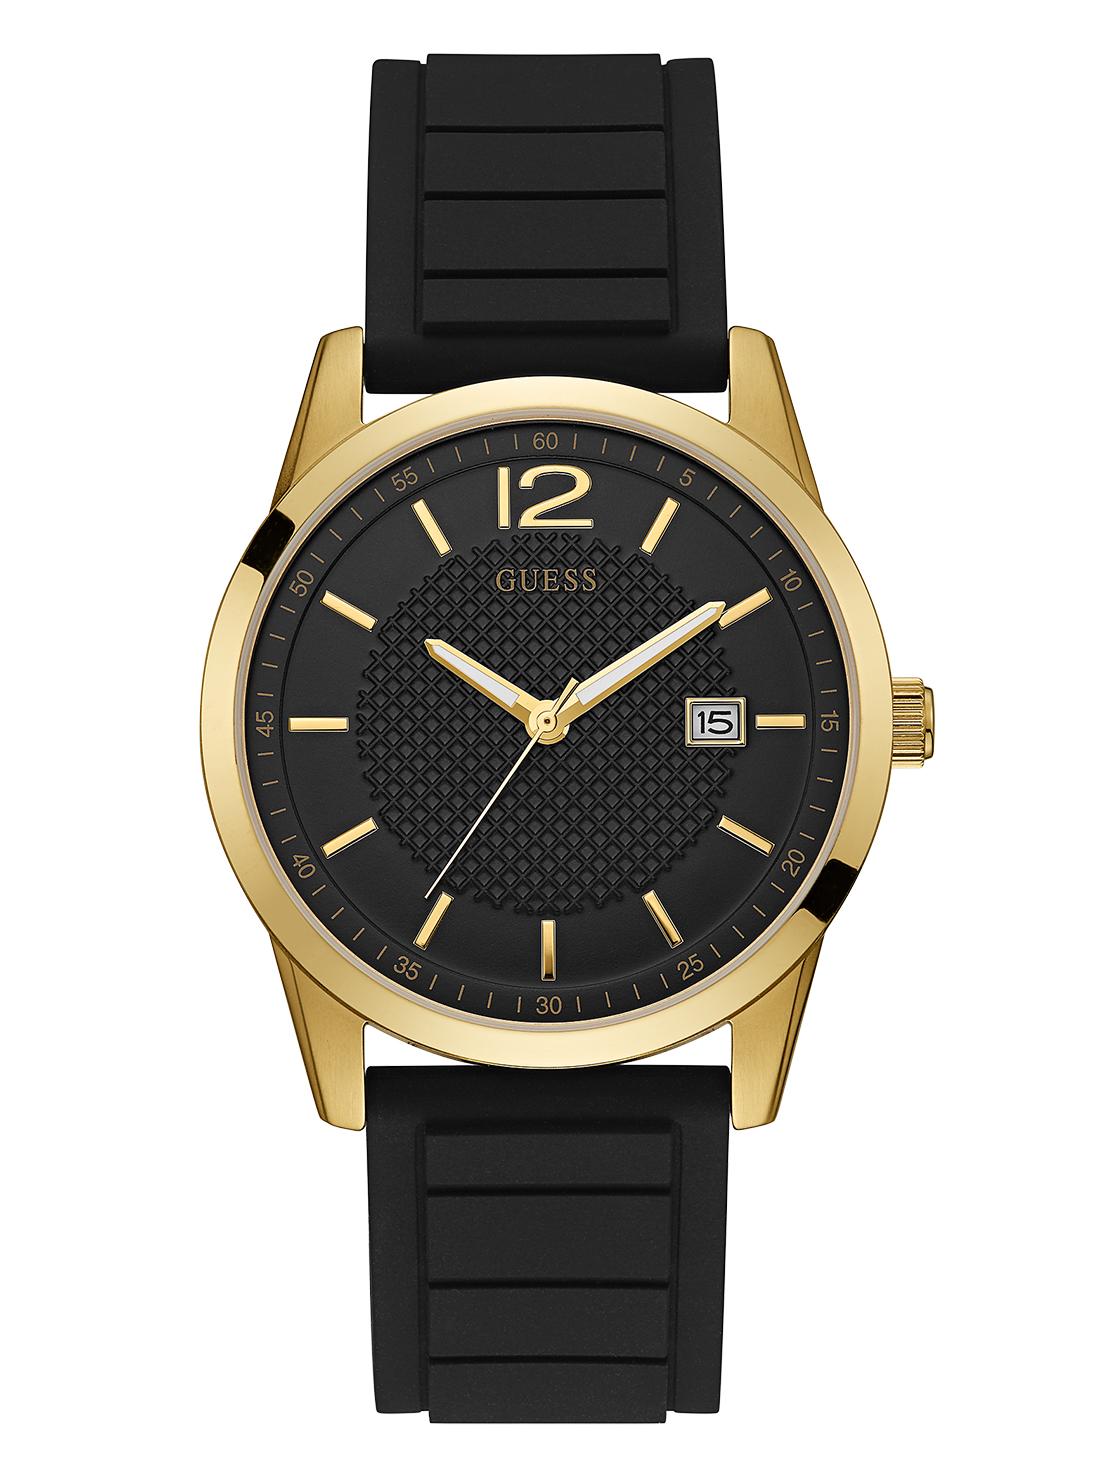 PERRY SILICONE WATCH IN GOLD